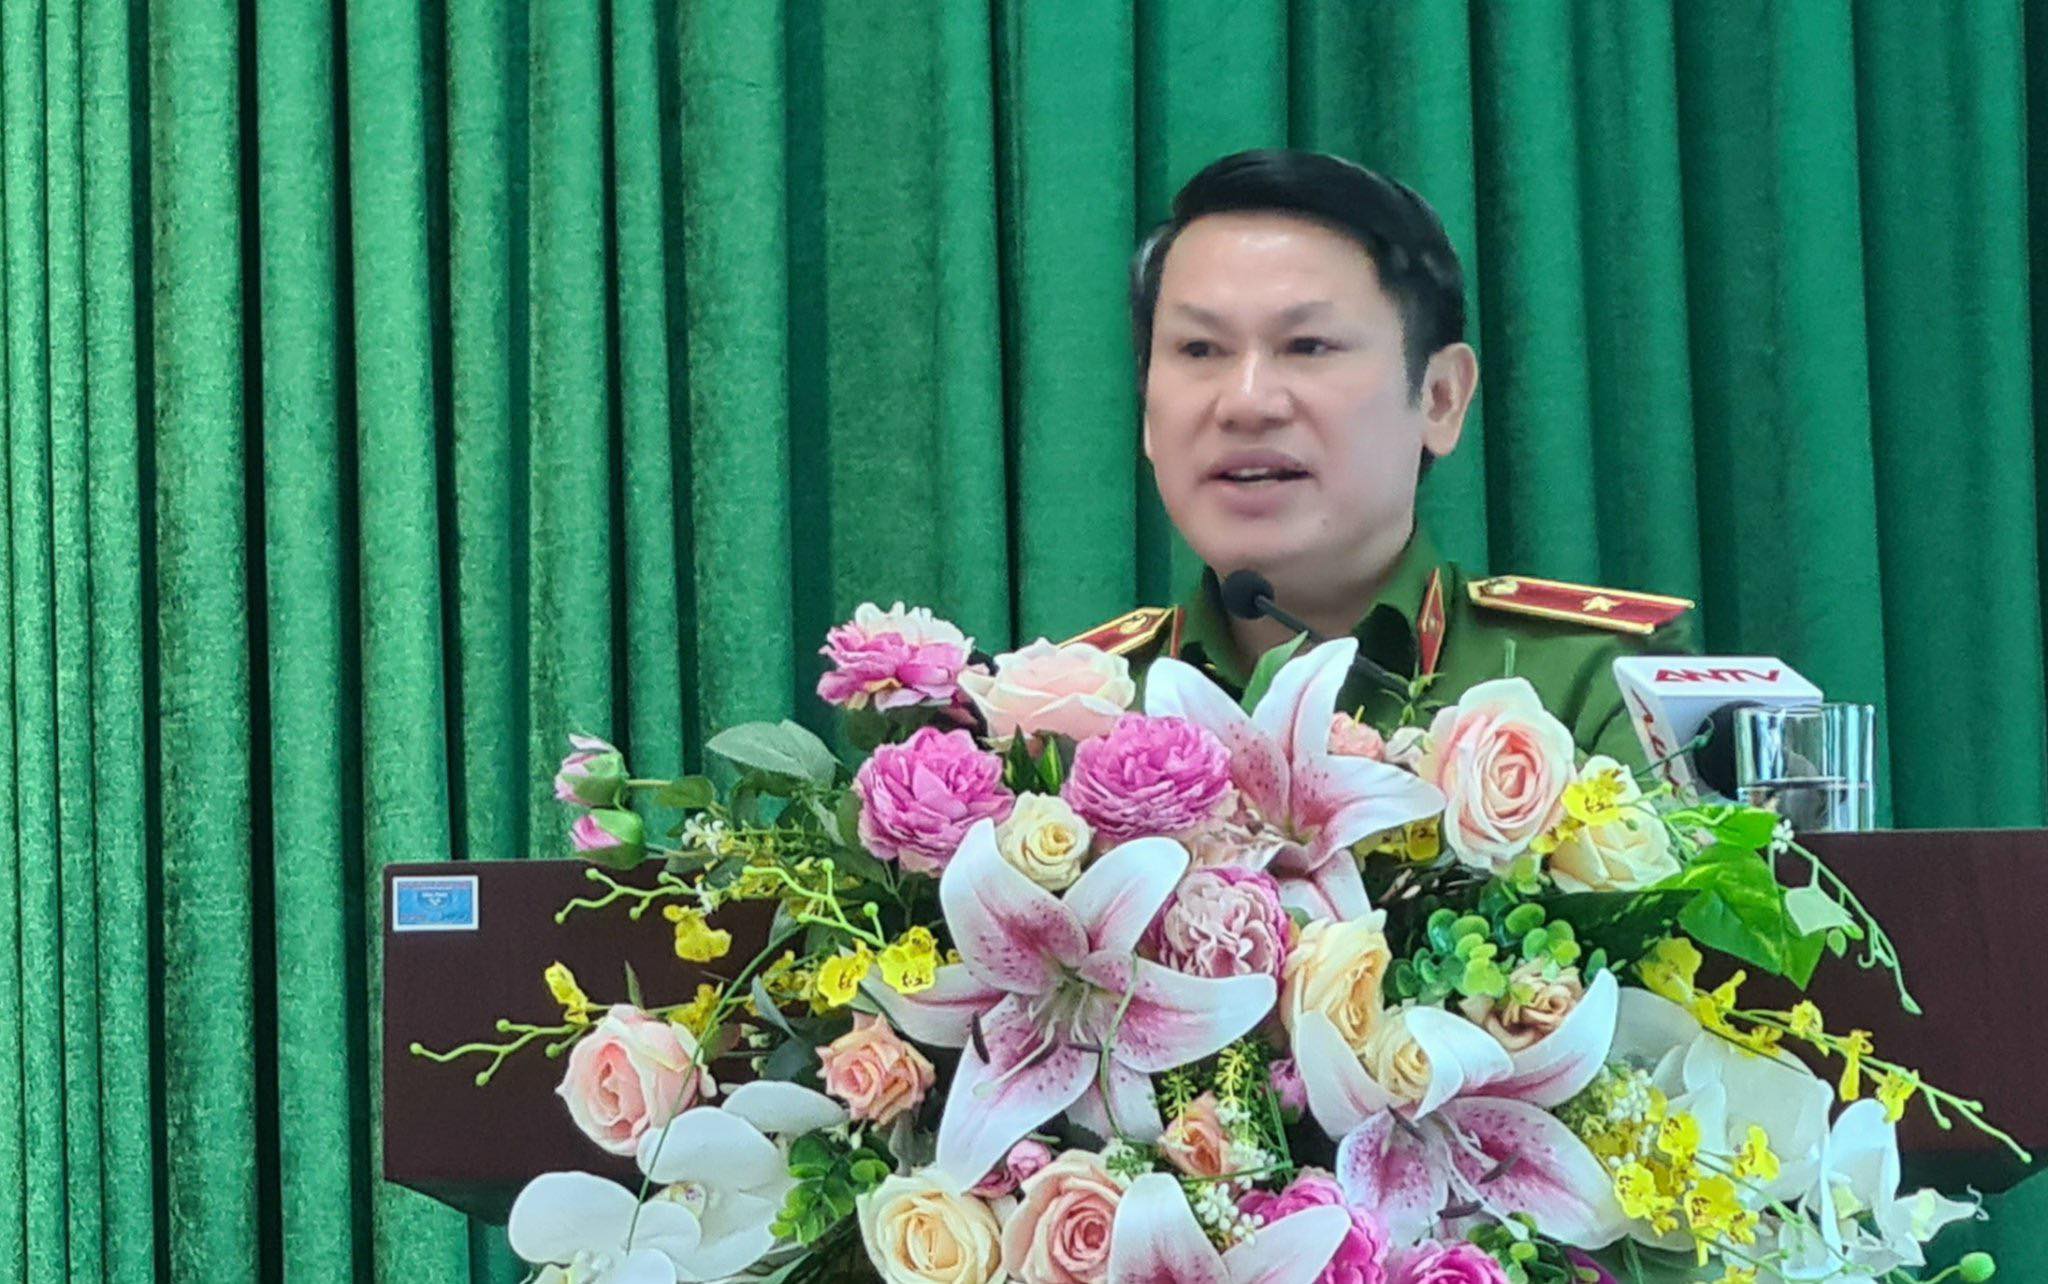 Major General Nguyen Van Vien, head of the Investigation Police Department on Drug-related Crimes (C04) under the Ministry of Public Security, summarizes the result of the unit’s crime fighting efforts in the first six months of 2022. Photo: Giang Long / Tuoi Tre